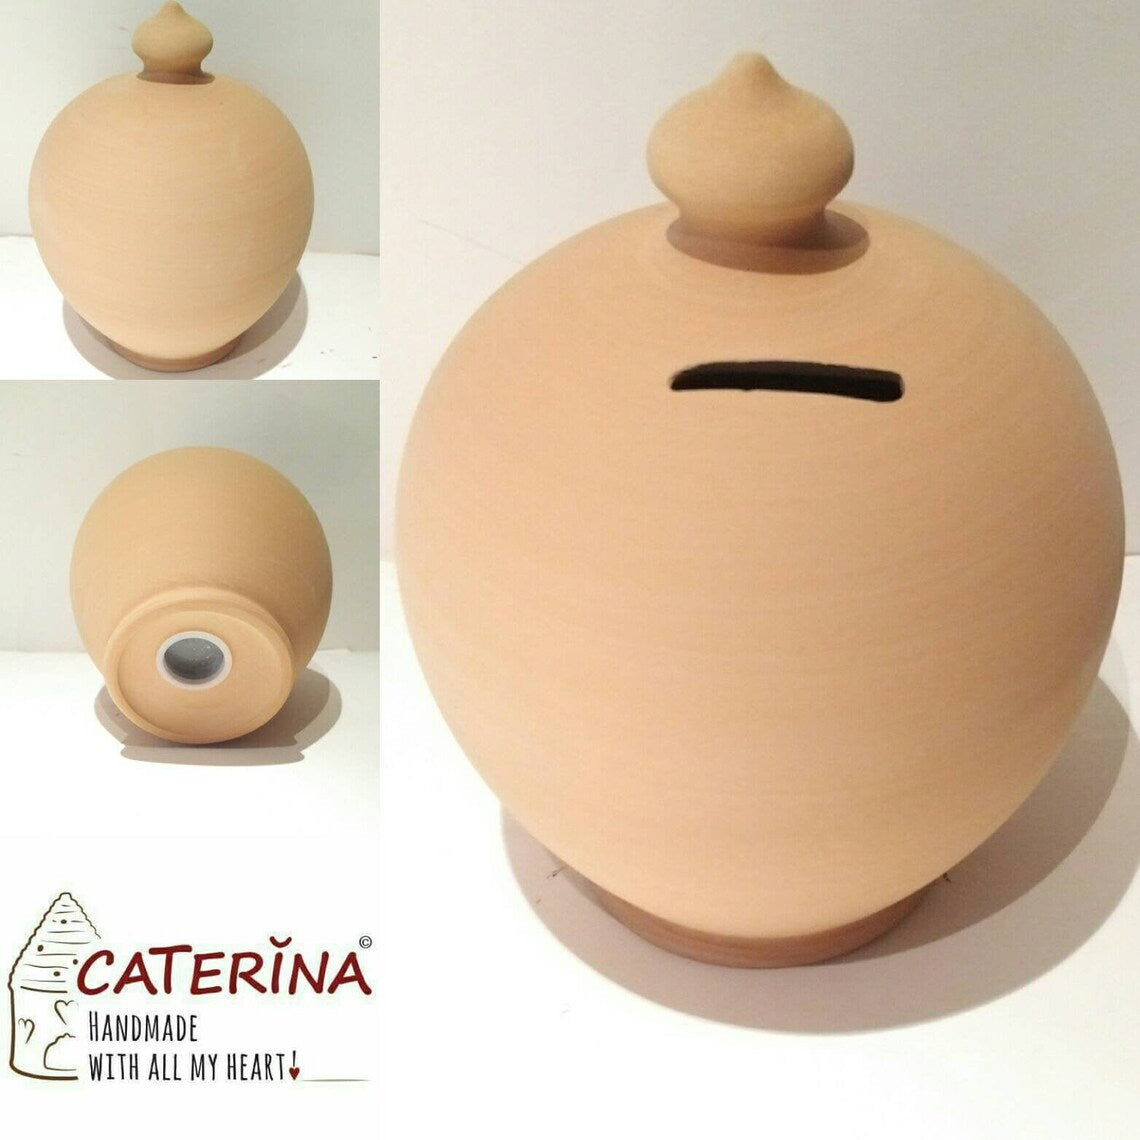 Curvy, gorgeous, precious and one of the most classy and thoughtful gifts for a man or a woman! Handmade and hand painted in my studio in Rome, Italy. Wheel thrown pottery, handmade Italian Coin bank.   Made to order. Size: 17 cm = 6.70 inches in height.  Color: Natural clay, not lacquered. With hole and stopper plug, or without hole.